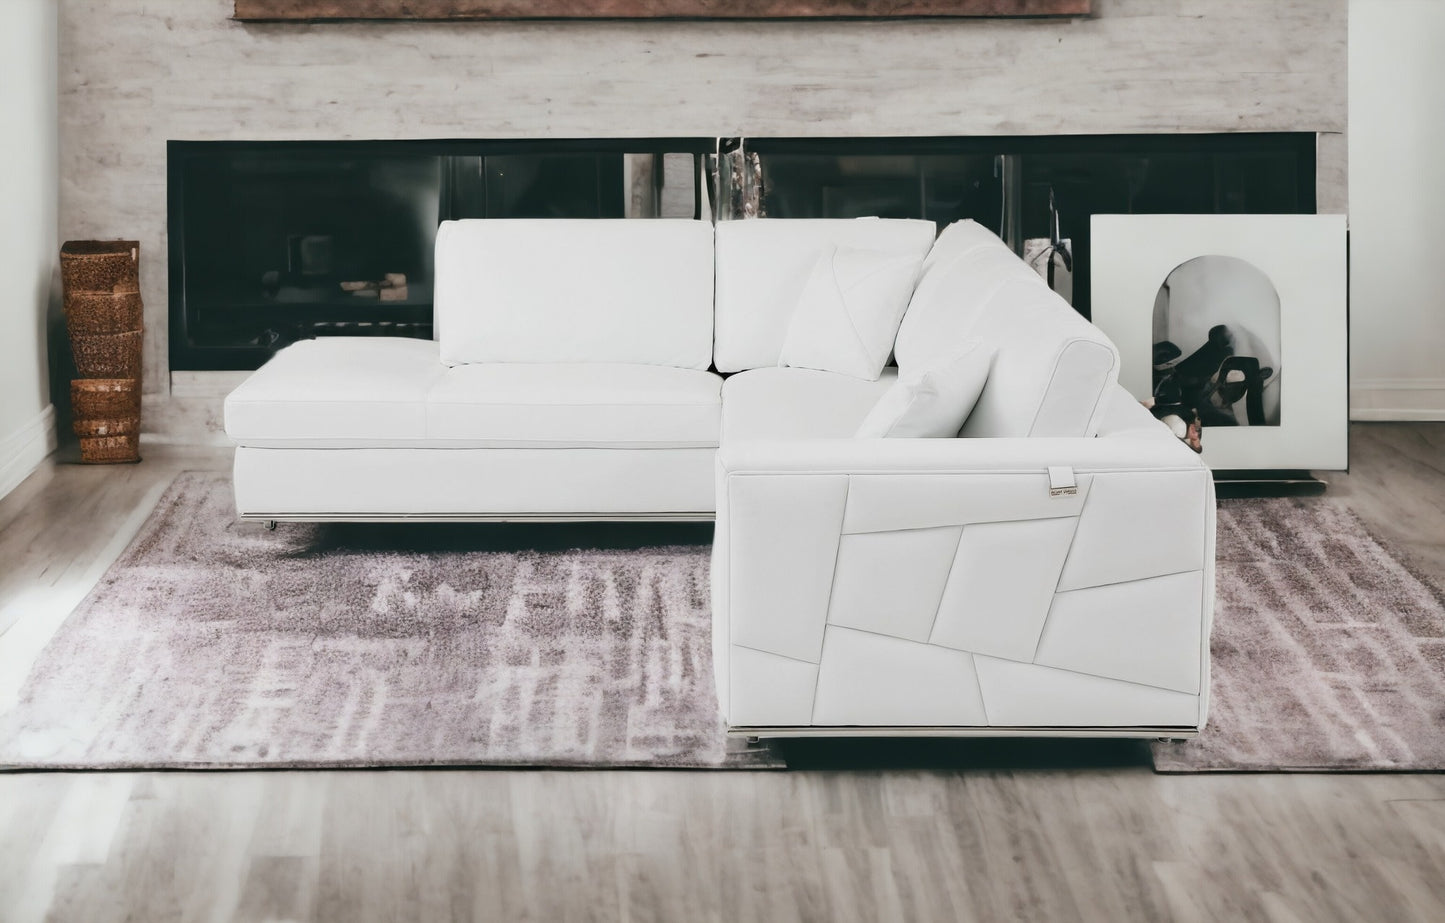 White Italian Leather Reclining L Shaped Two Piece Corner Sectional